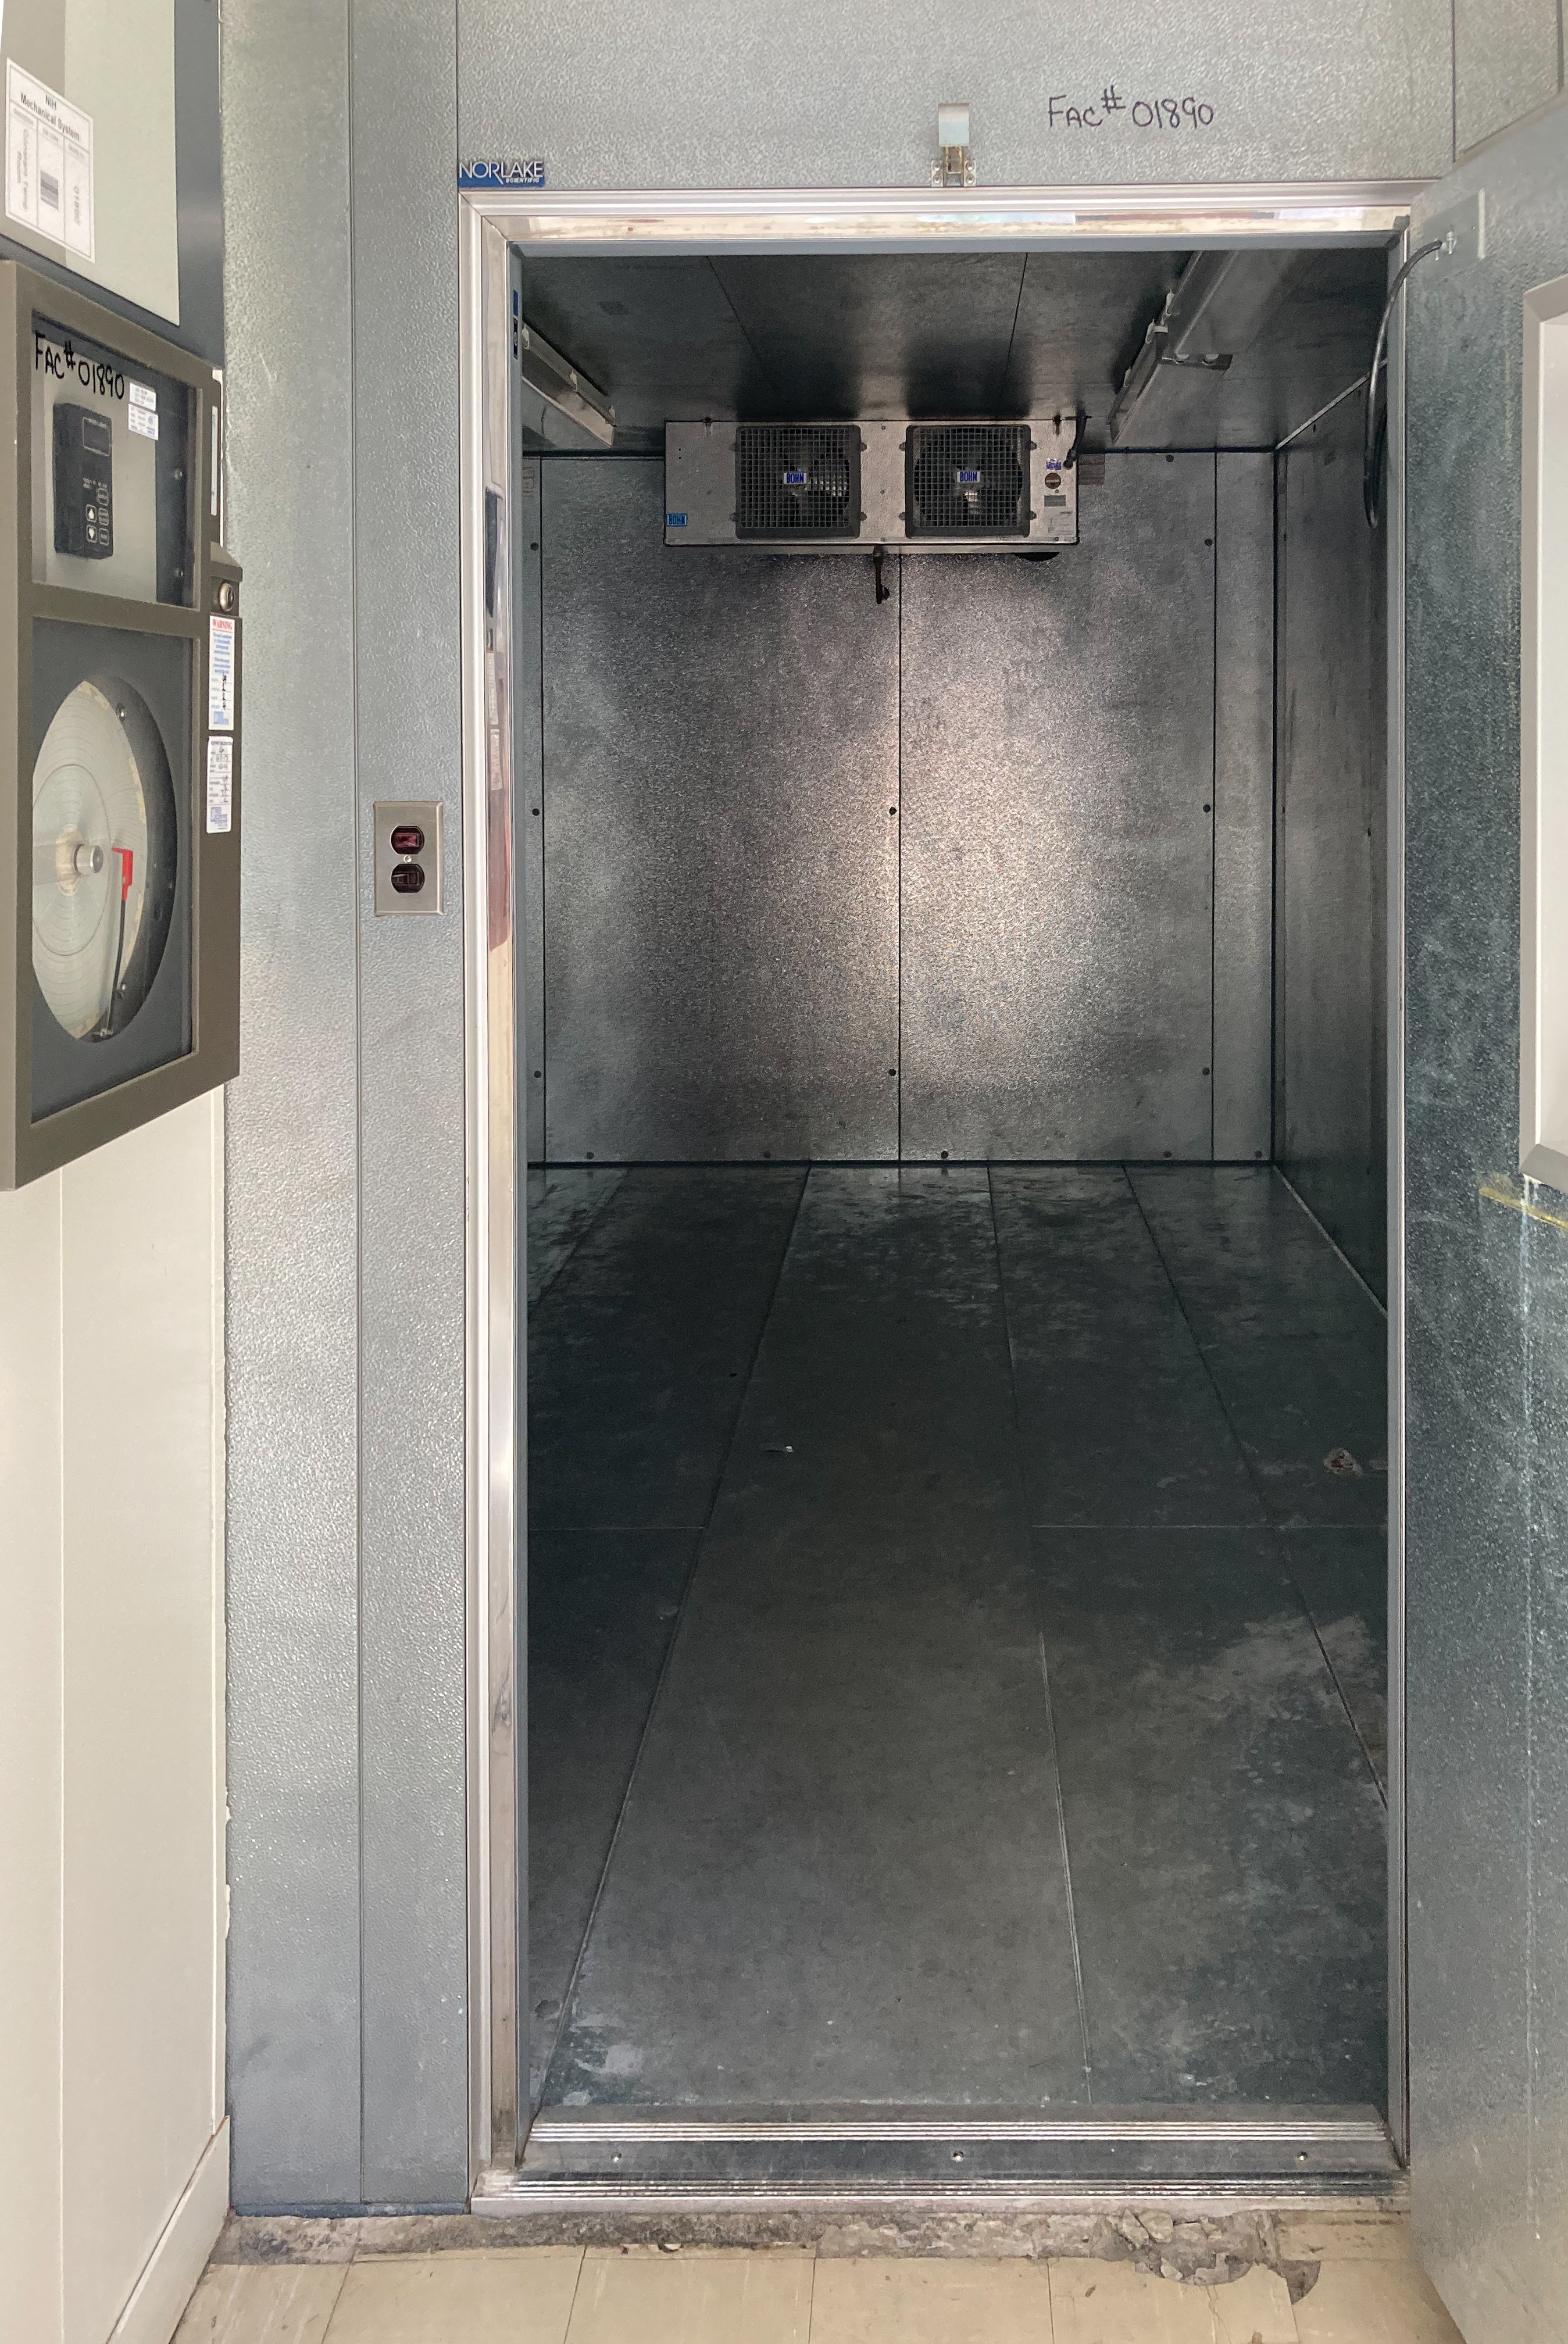 The refrigerated room with the door open. two fans can be seen in the top rear of the room, The walls and floor are metal. The room is empty.